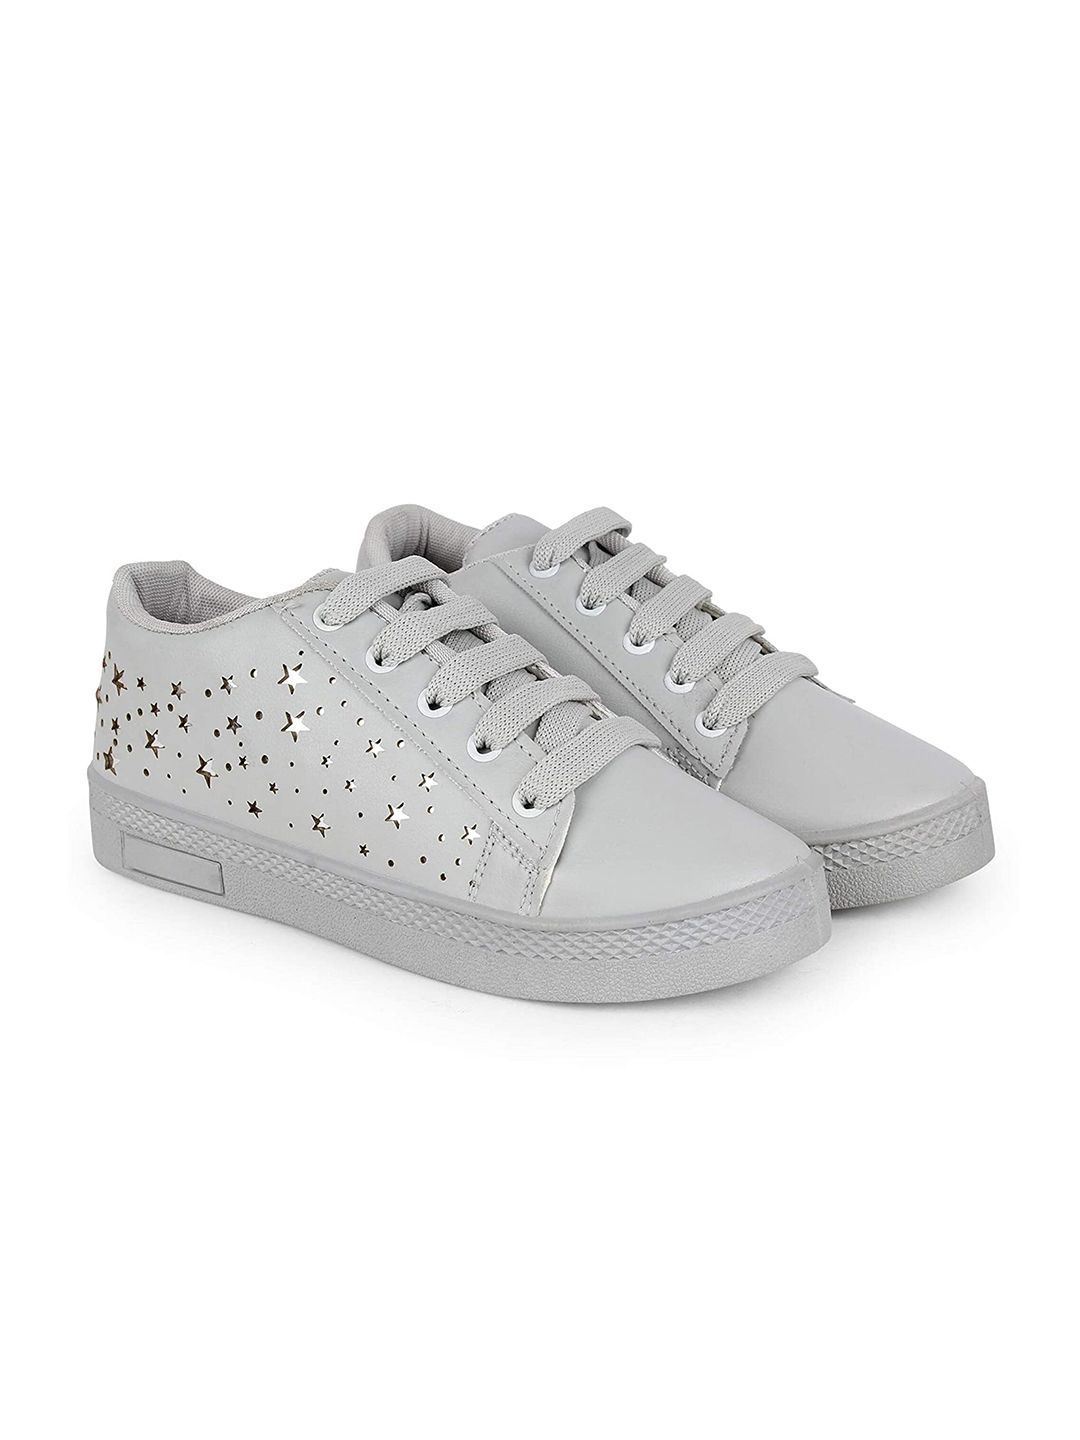 BEONZA Women Grey Printed Sneakers Price in India